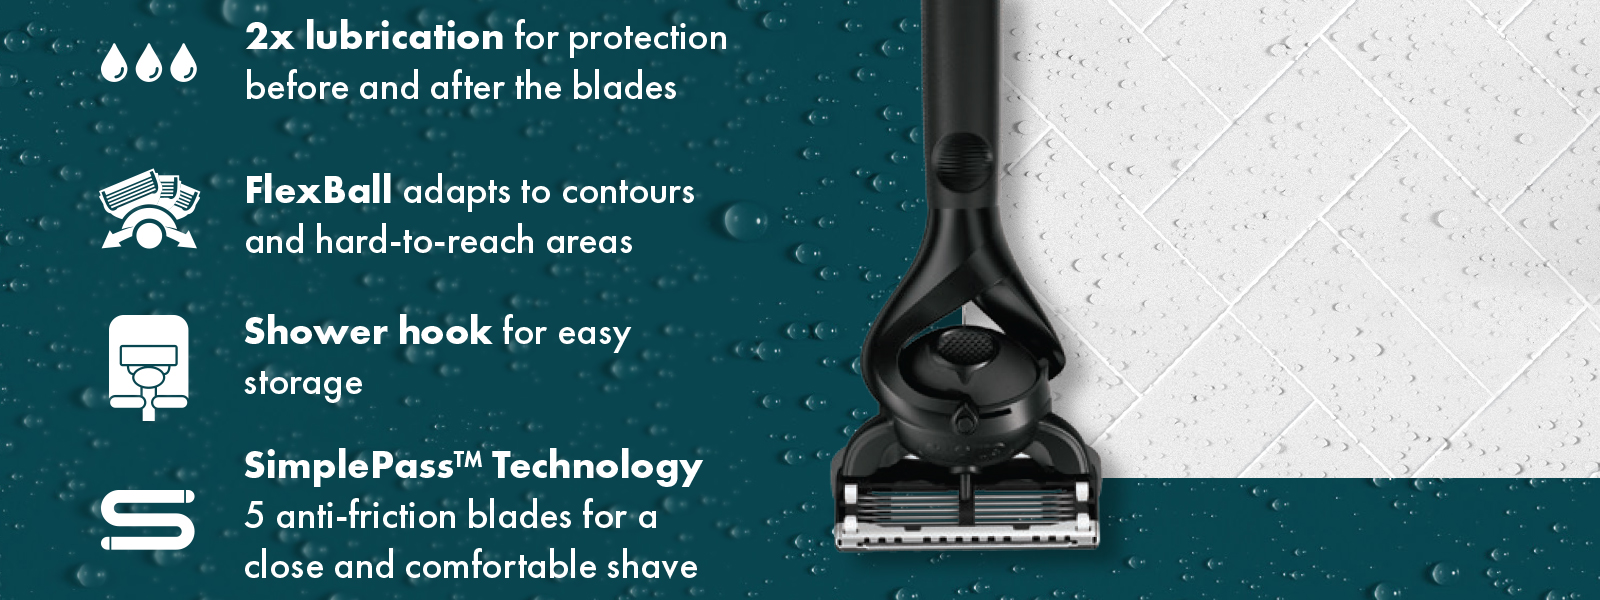 2x lubrication for protection before and after the blades FlexBall adapts to contours and hard-to-reach areas Shower hook for easy storage Simple Pass TechnologyS 5 anti-friction blades for a close and comfortable shave